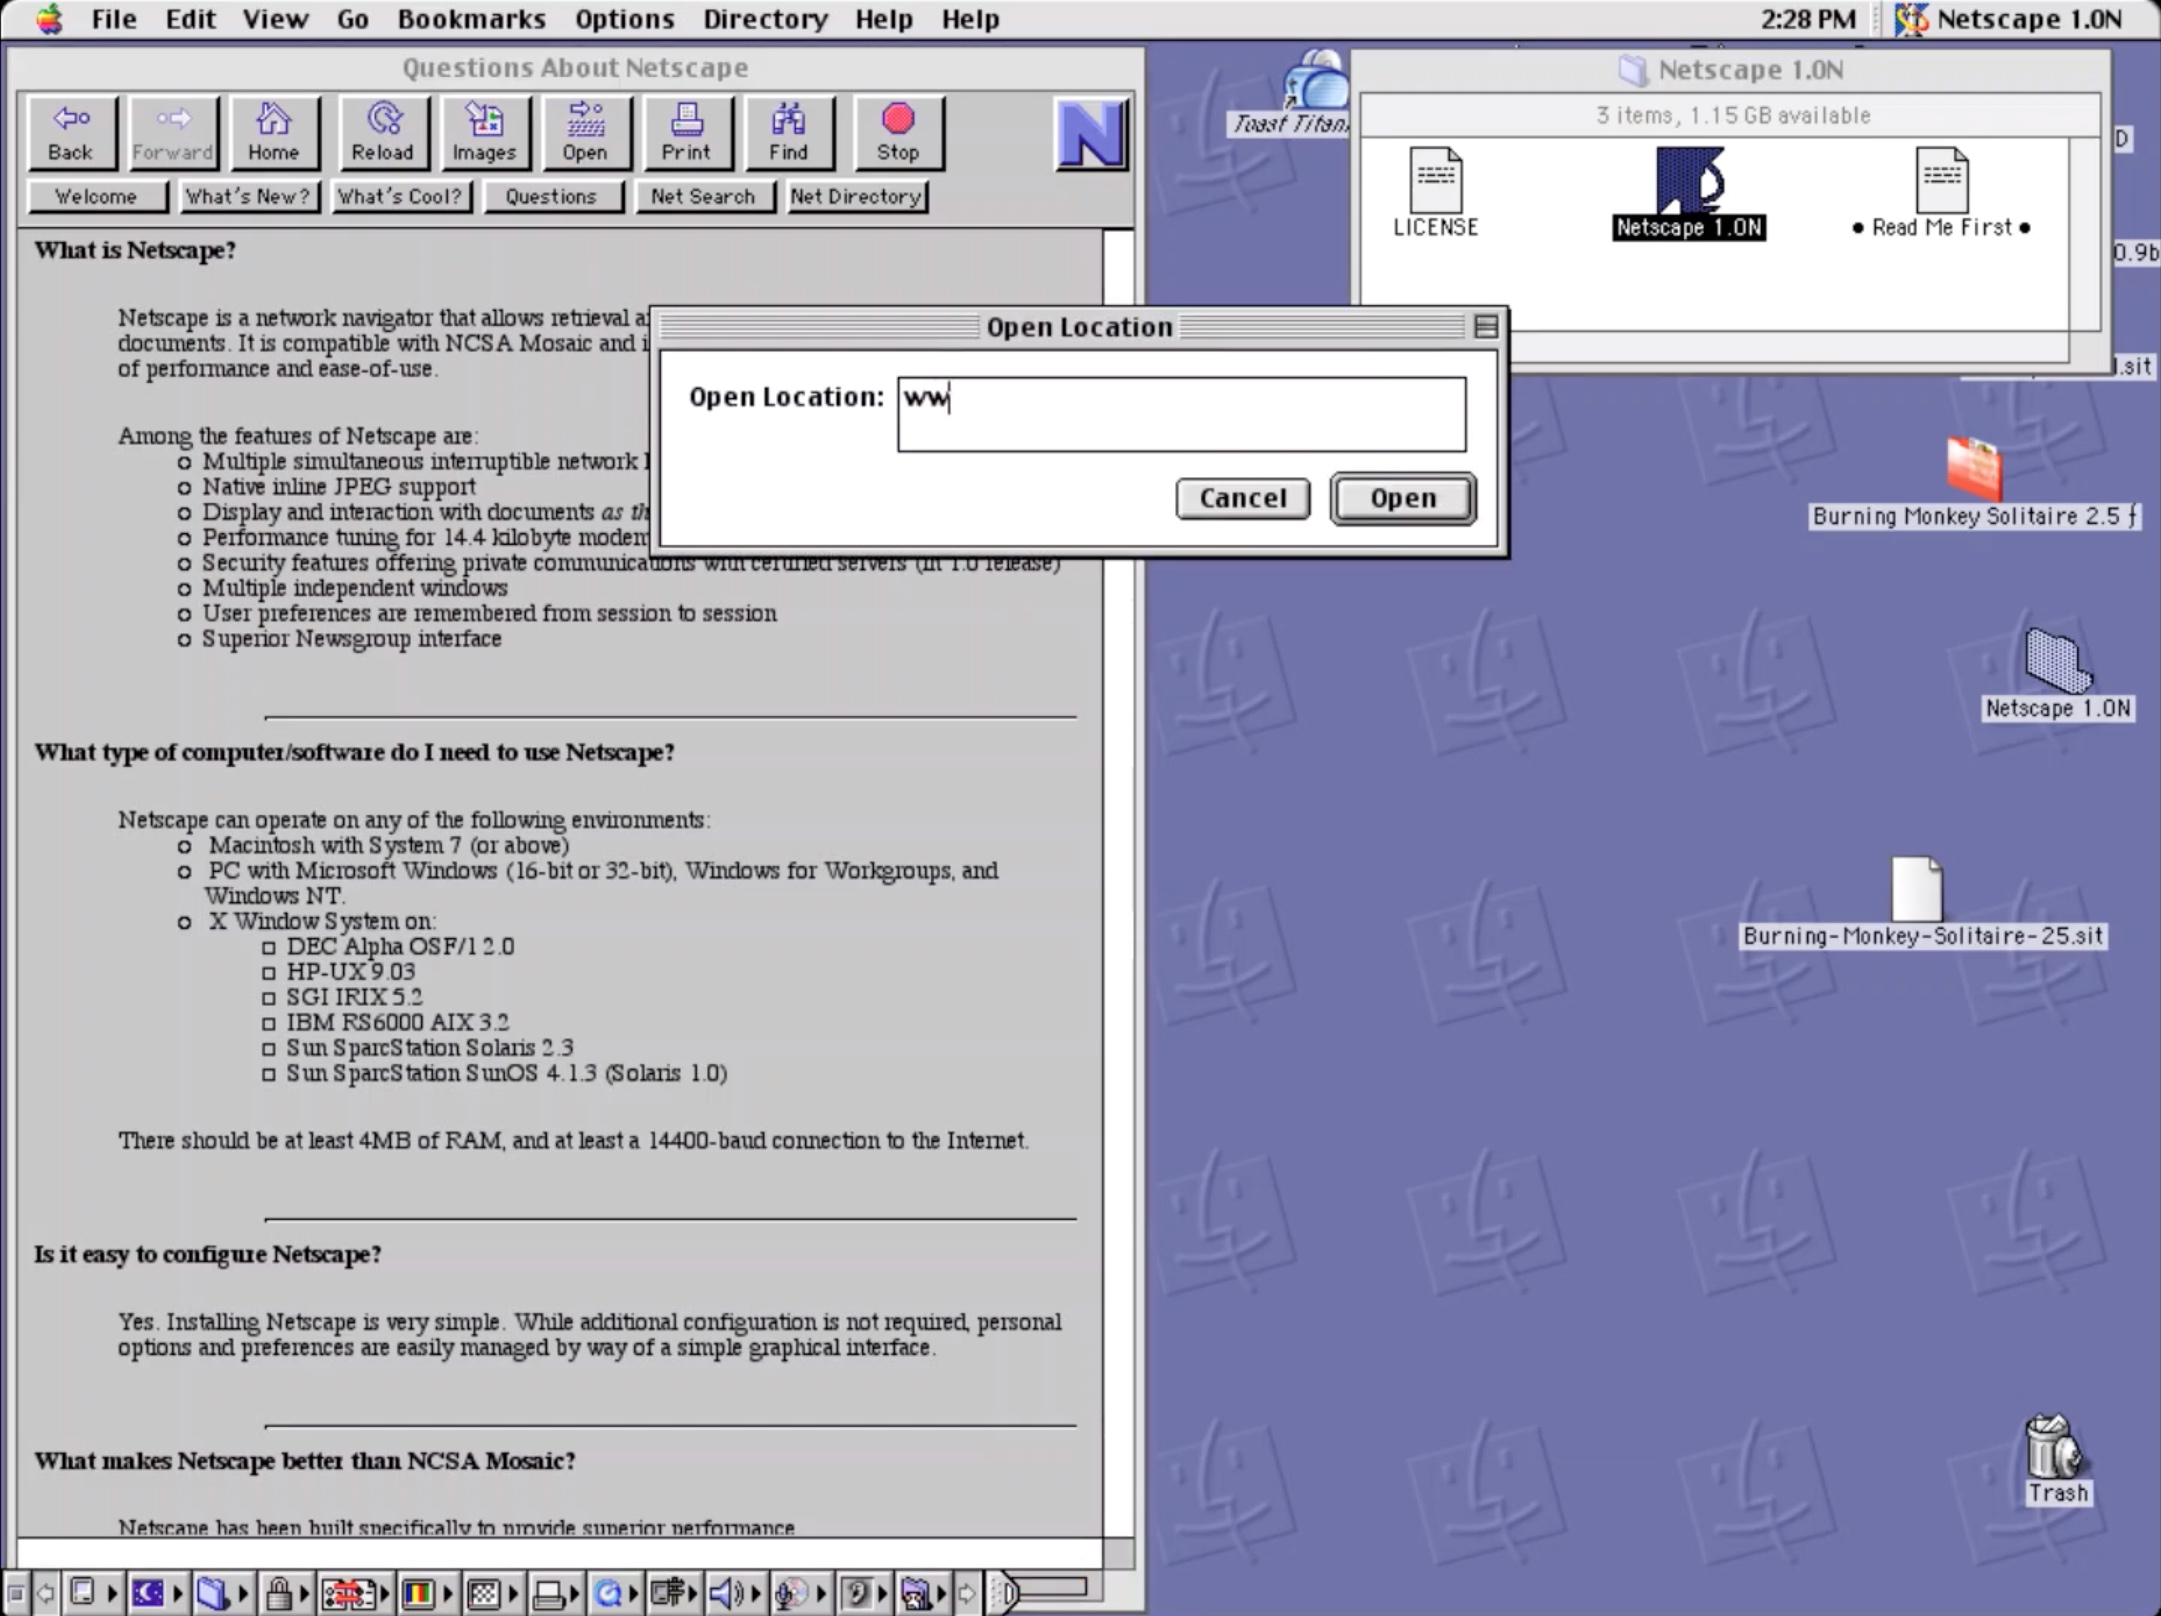 Netscape Navigator 1.0N Browser for Mac Open Location Dialog (1994)